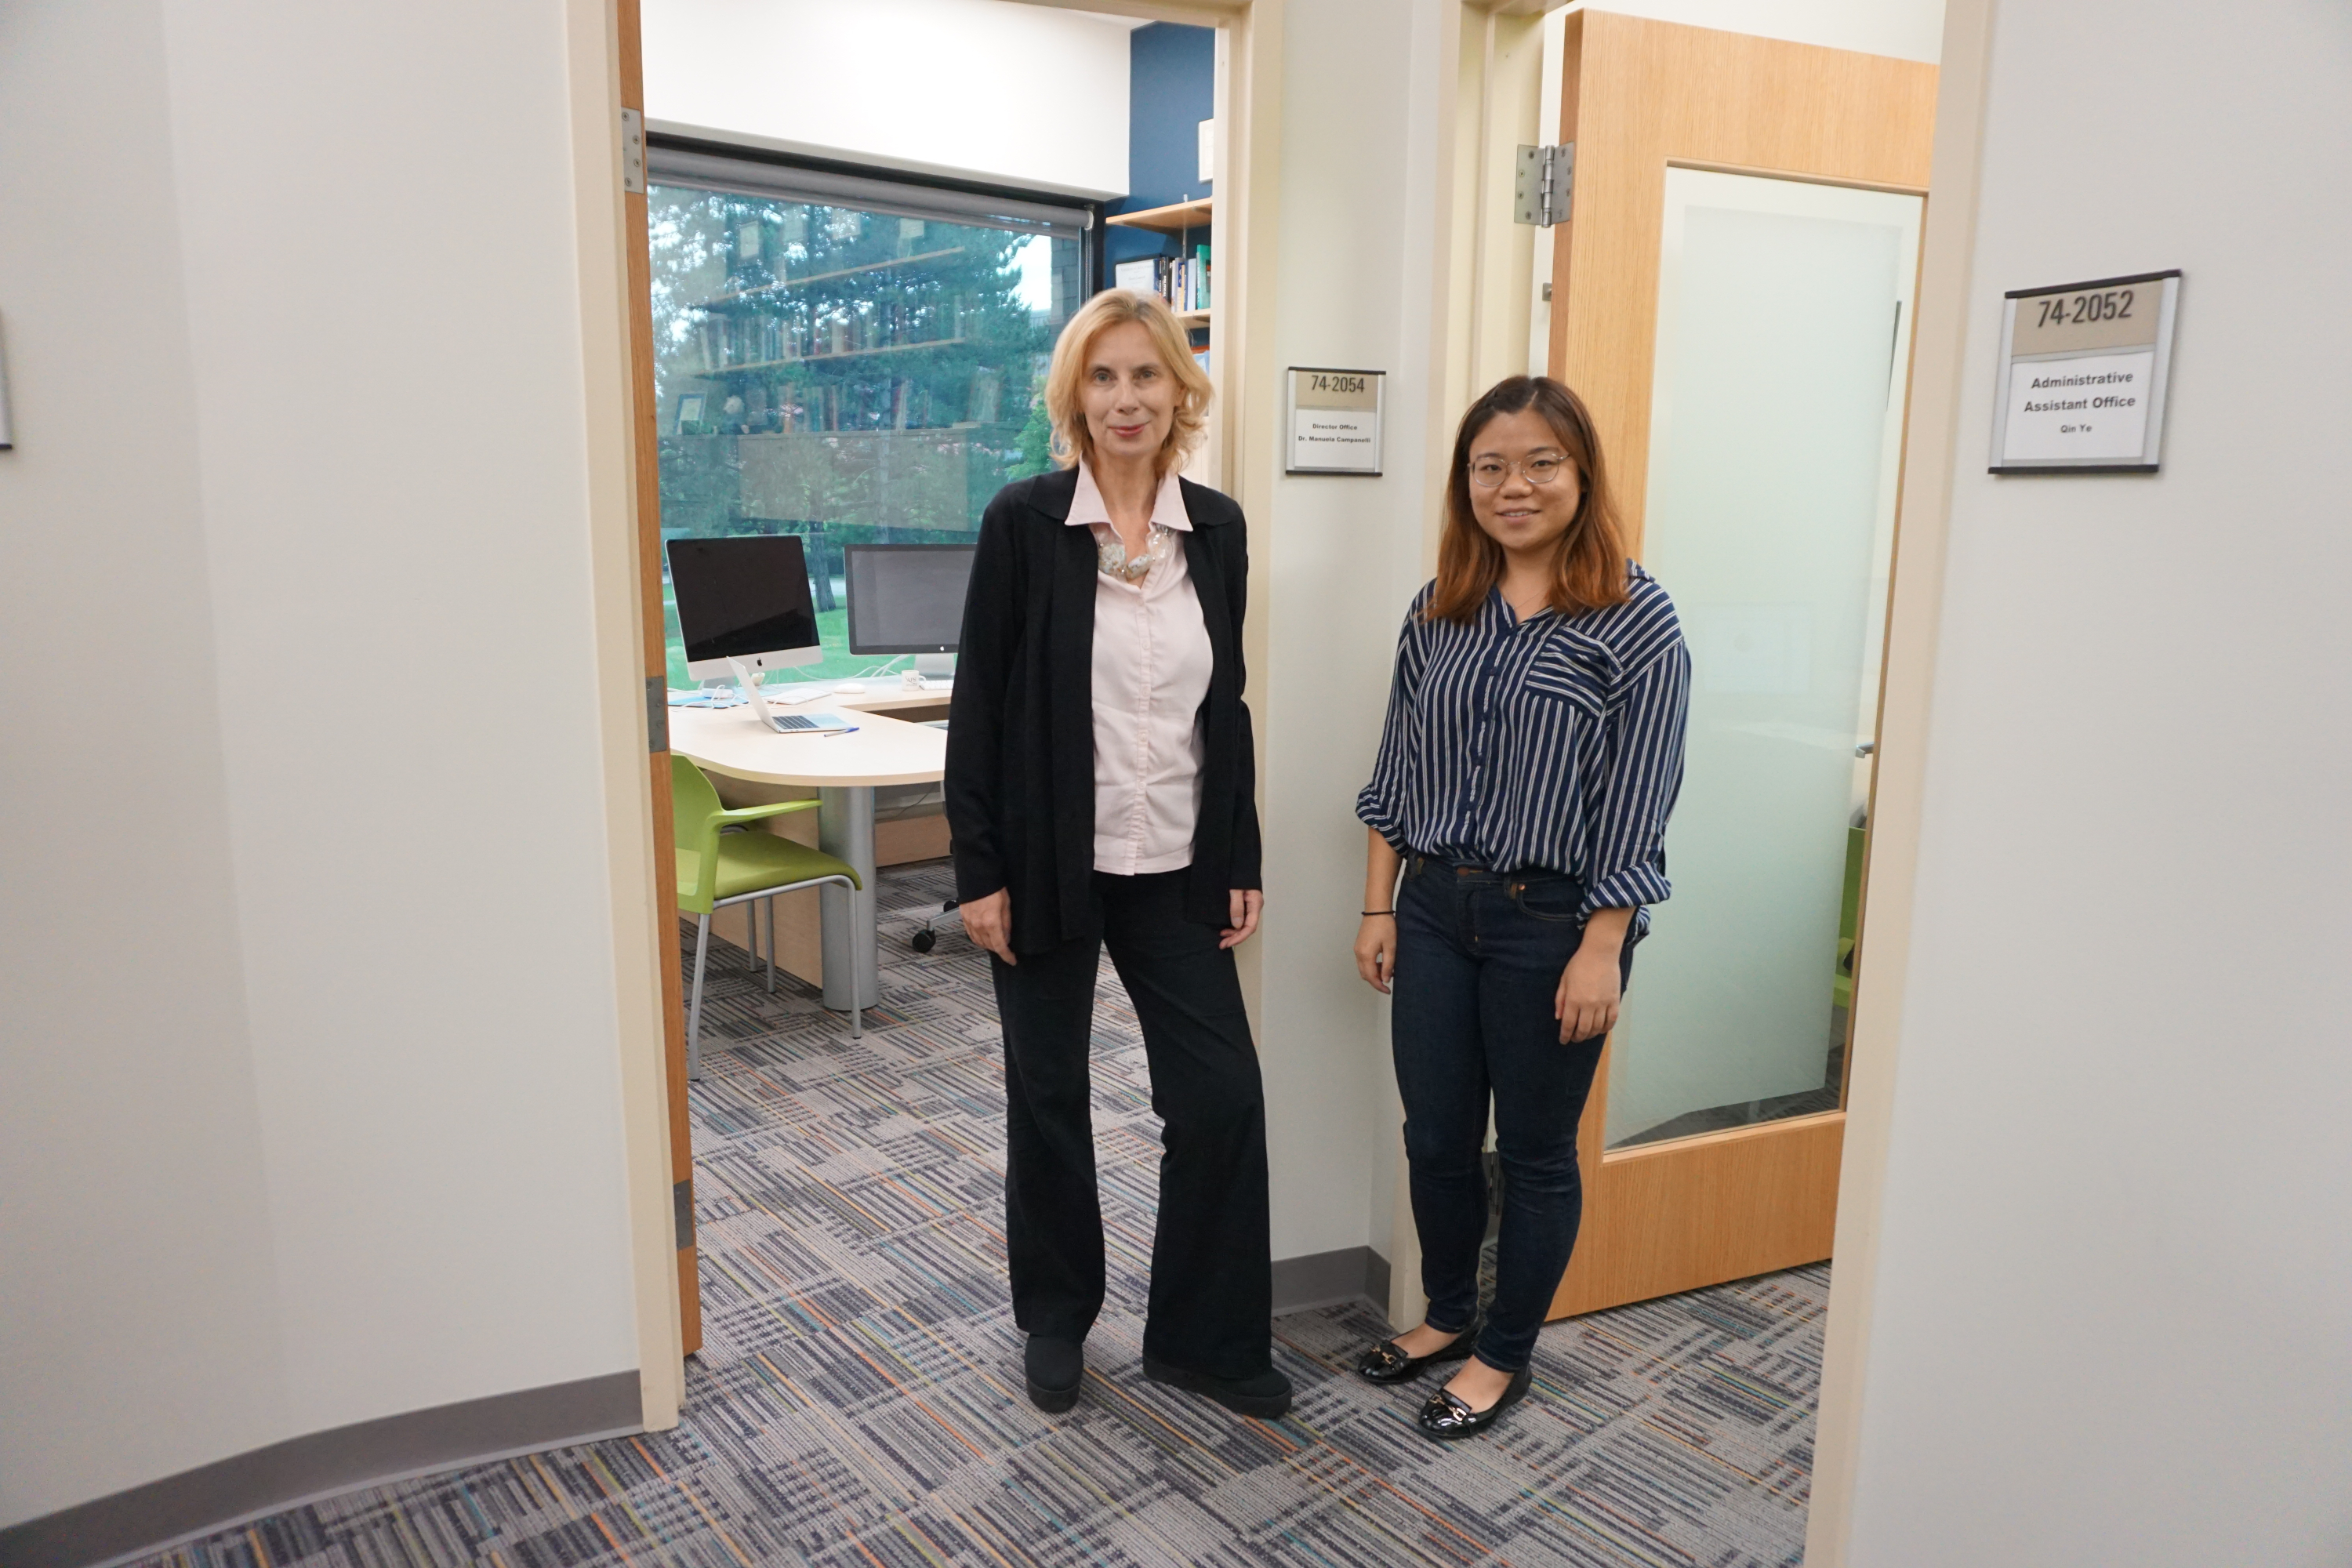 CCRG Director Manuela Campanelli (left) and Financial & Admin Assistant Qin Ye (right) standing outside their offices.